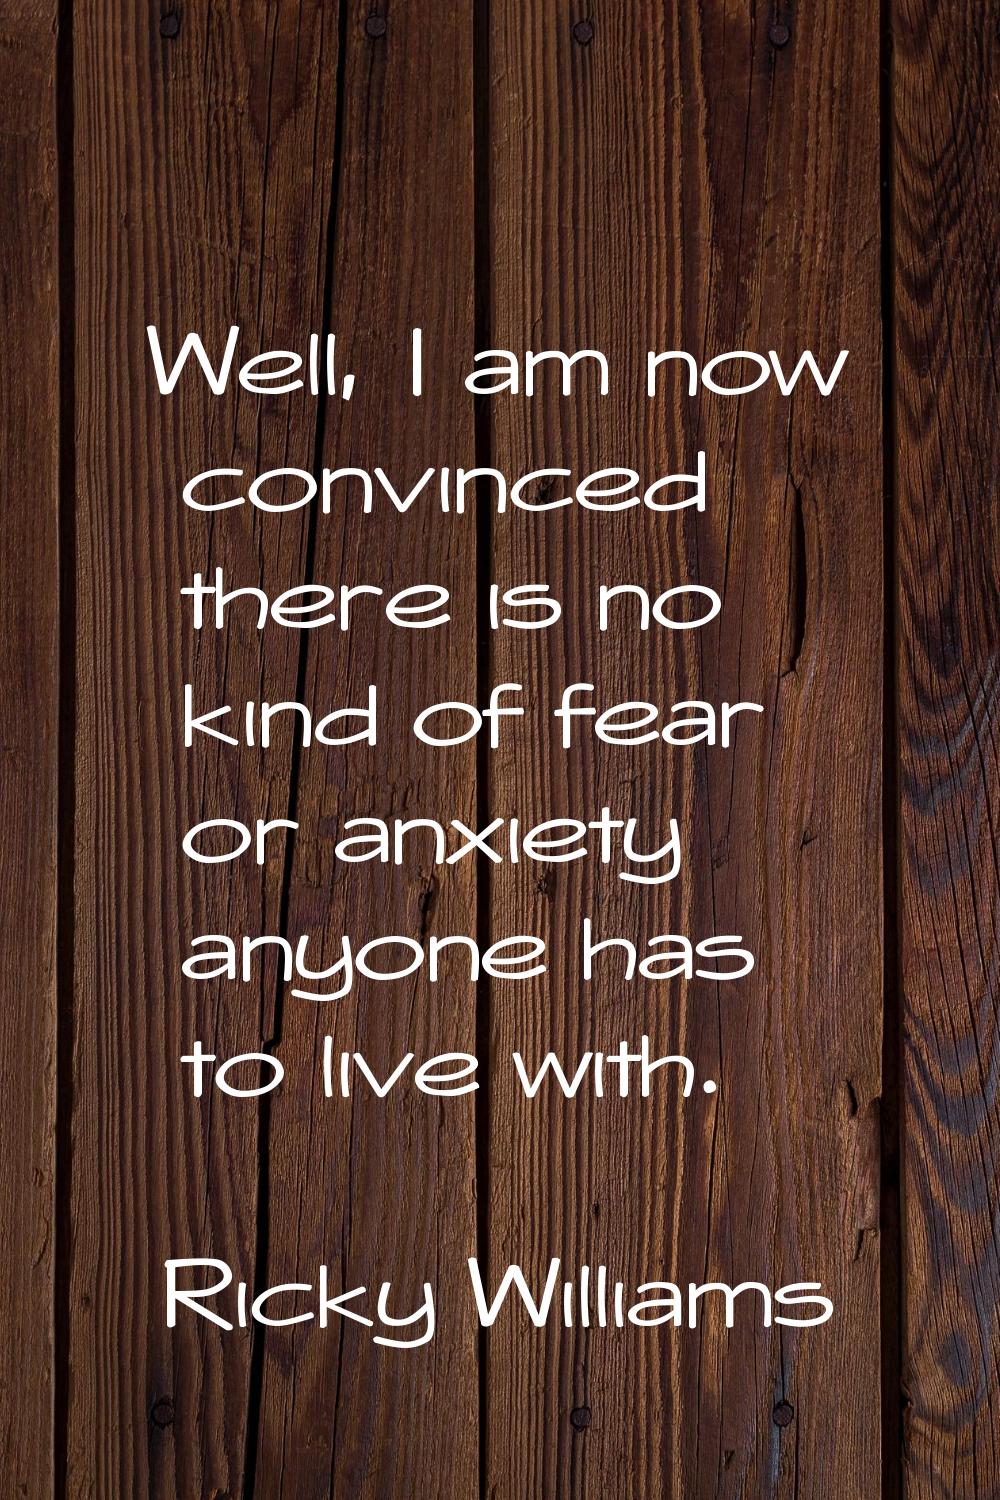 Well, I am now convinced there is no kind of fear or anxiety anyone has to live with.